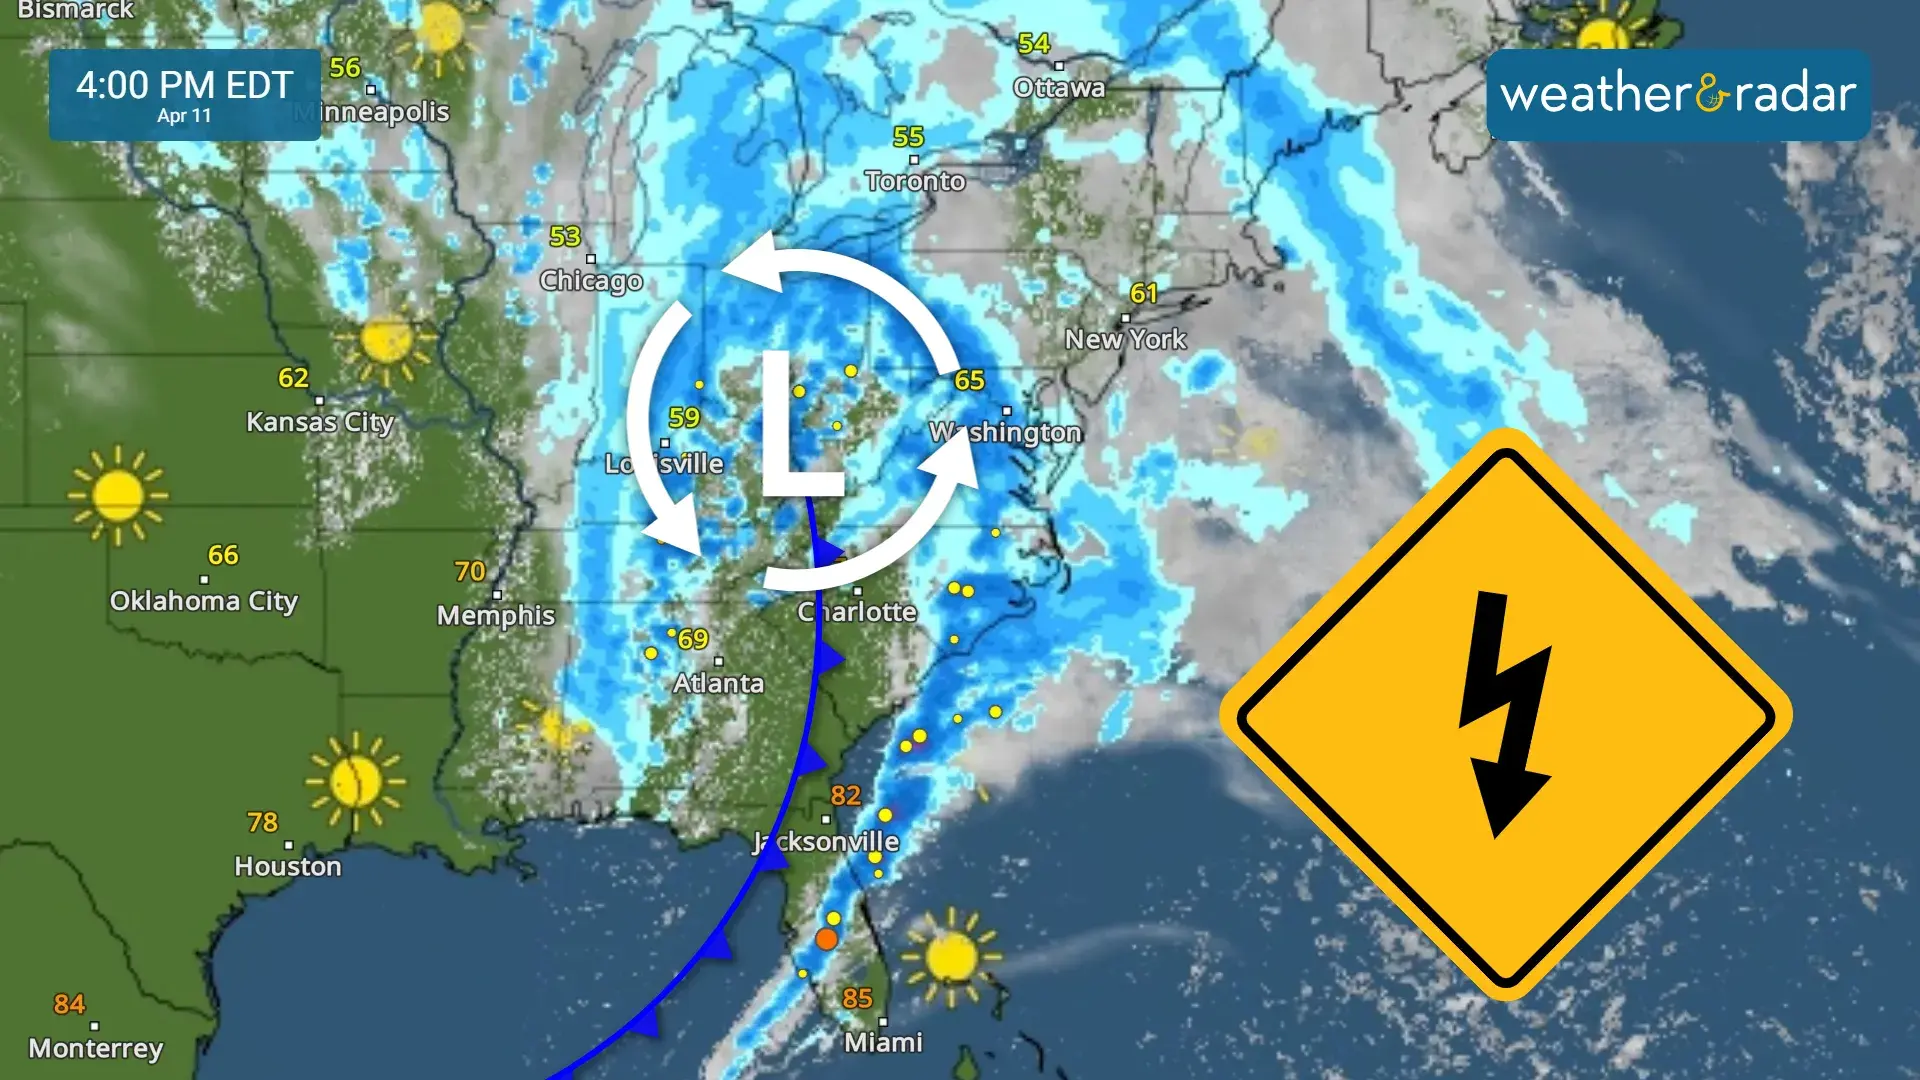 Low pressure system on the move!